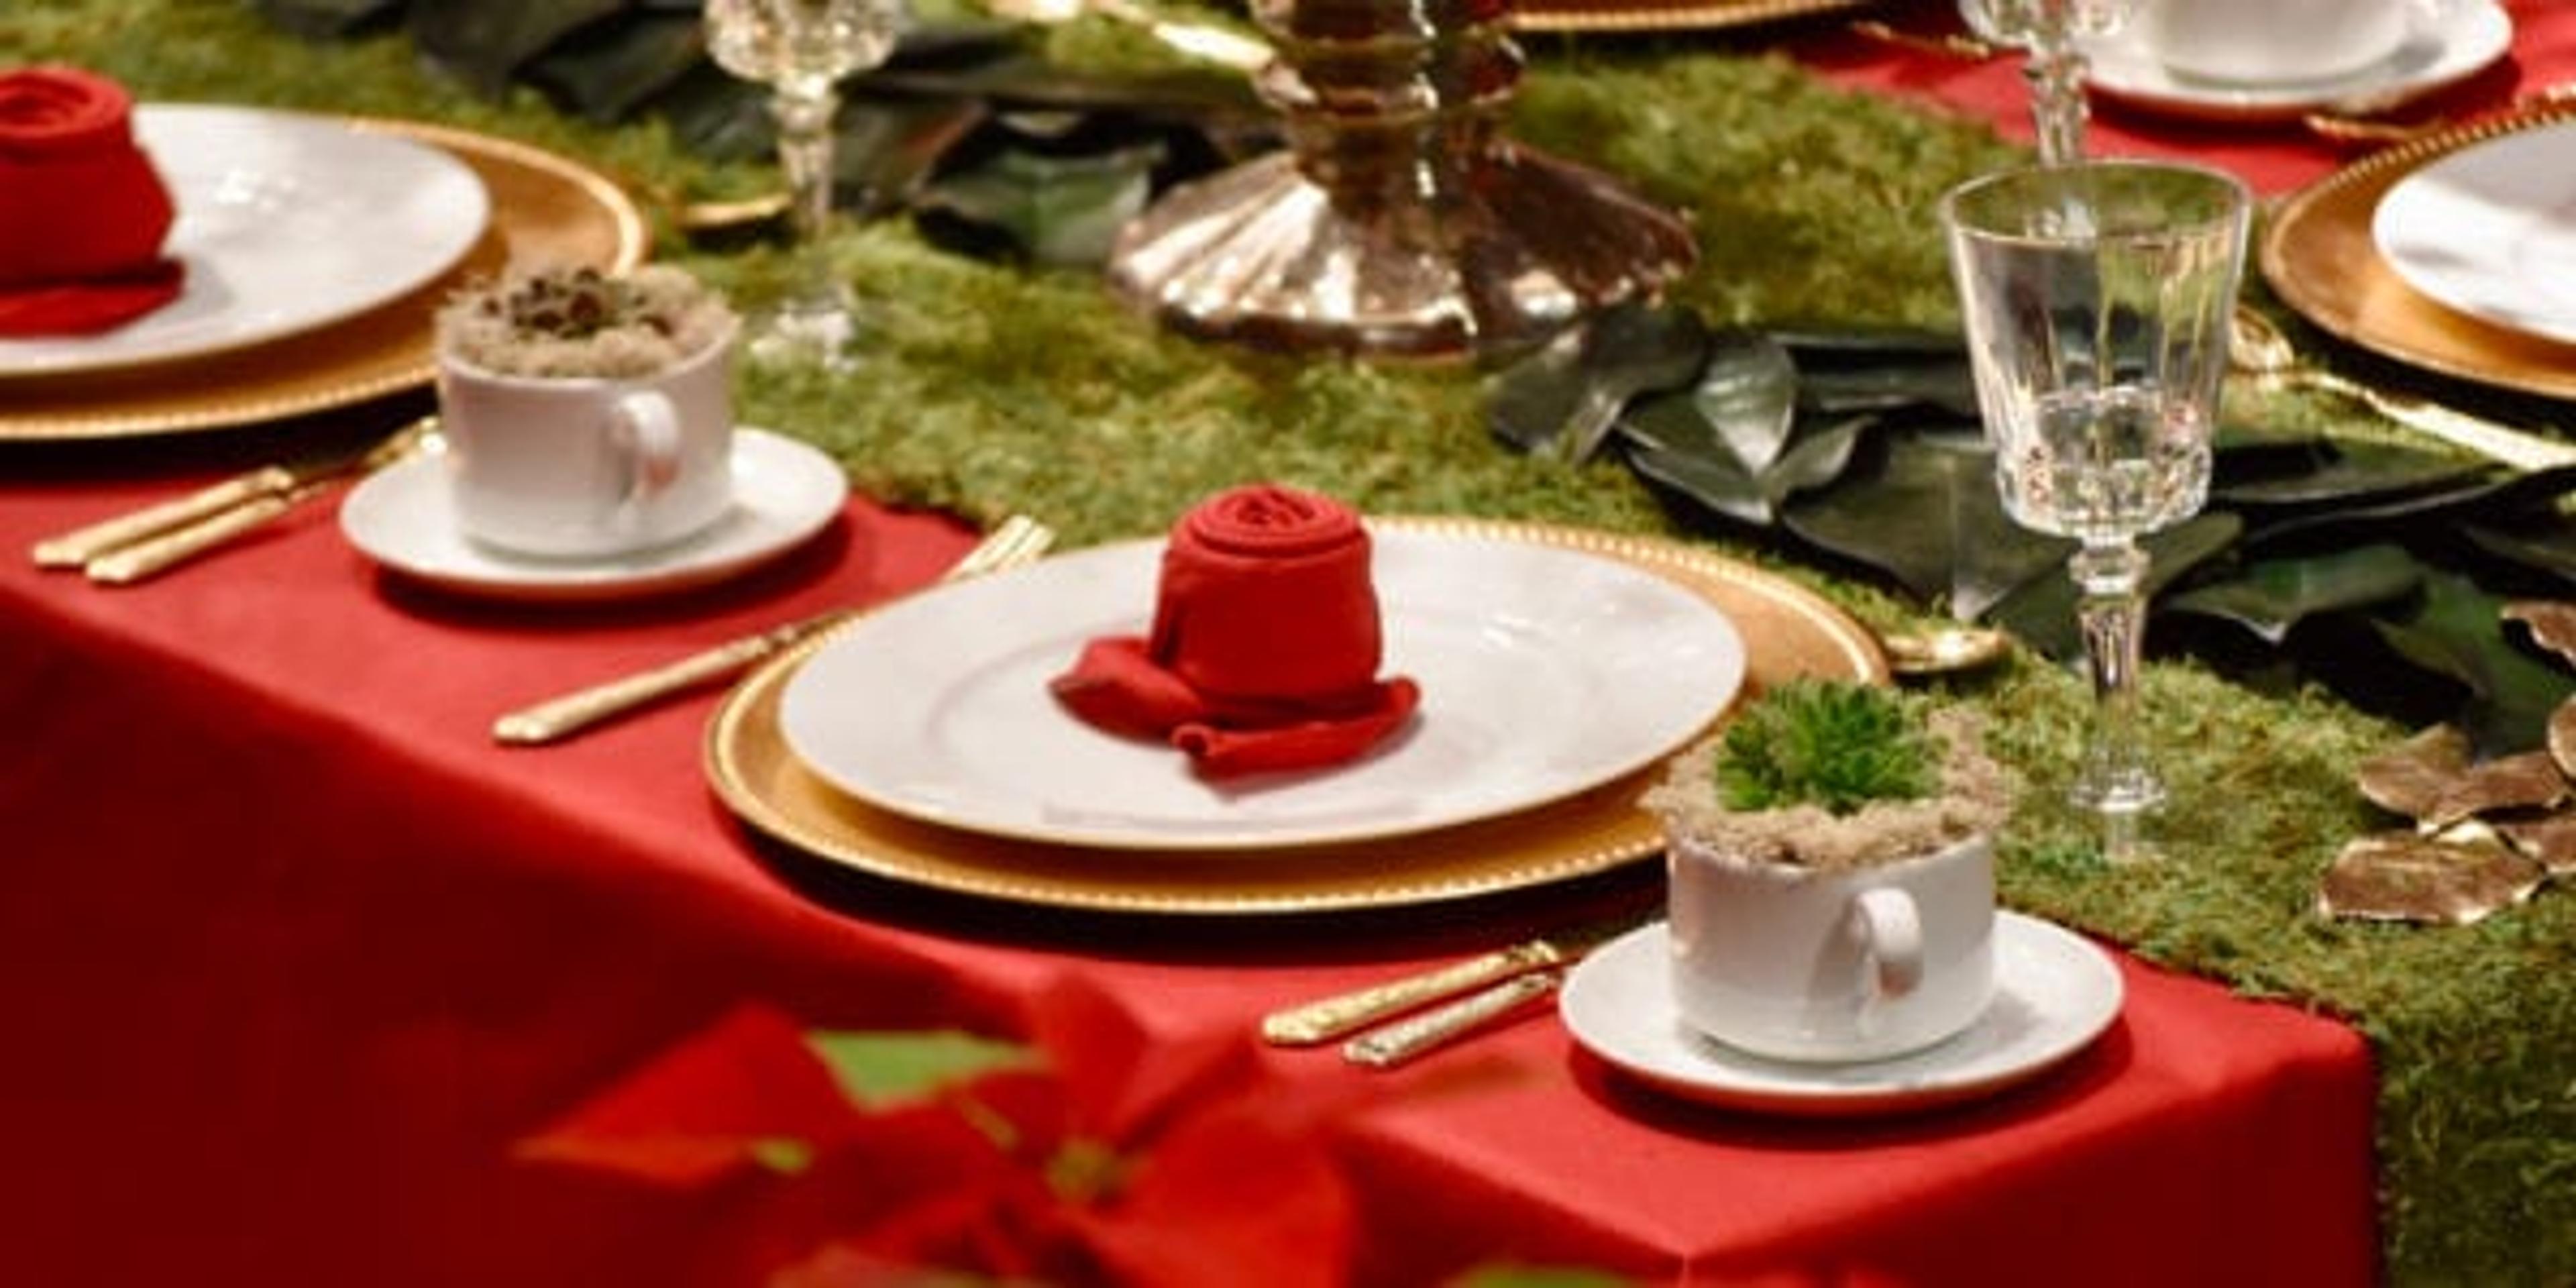 Red table with red and white place setting